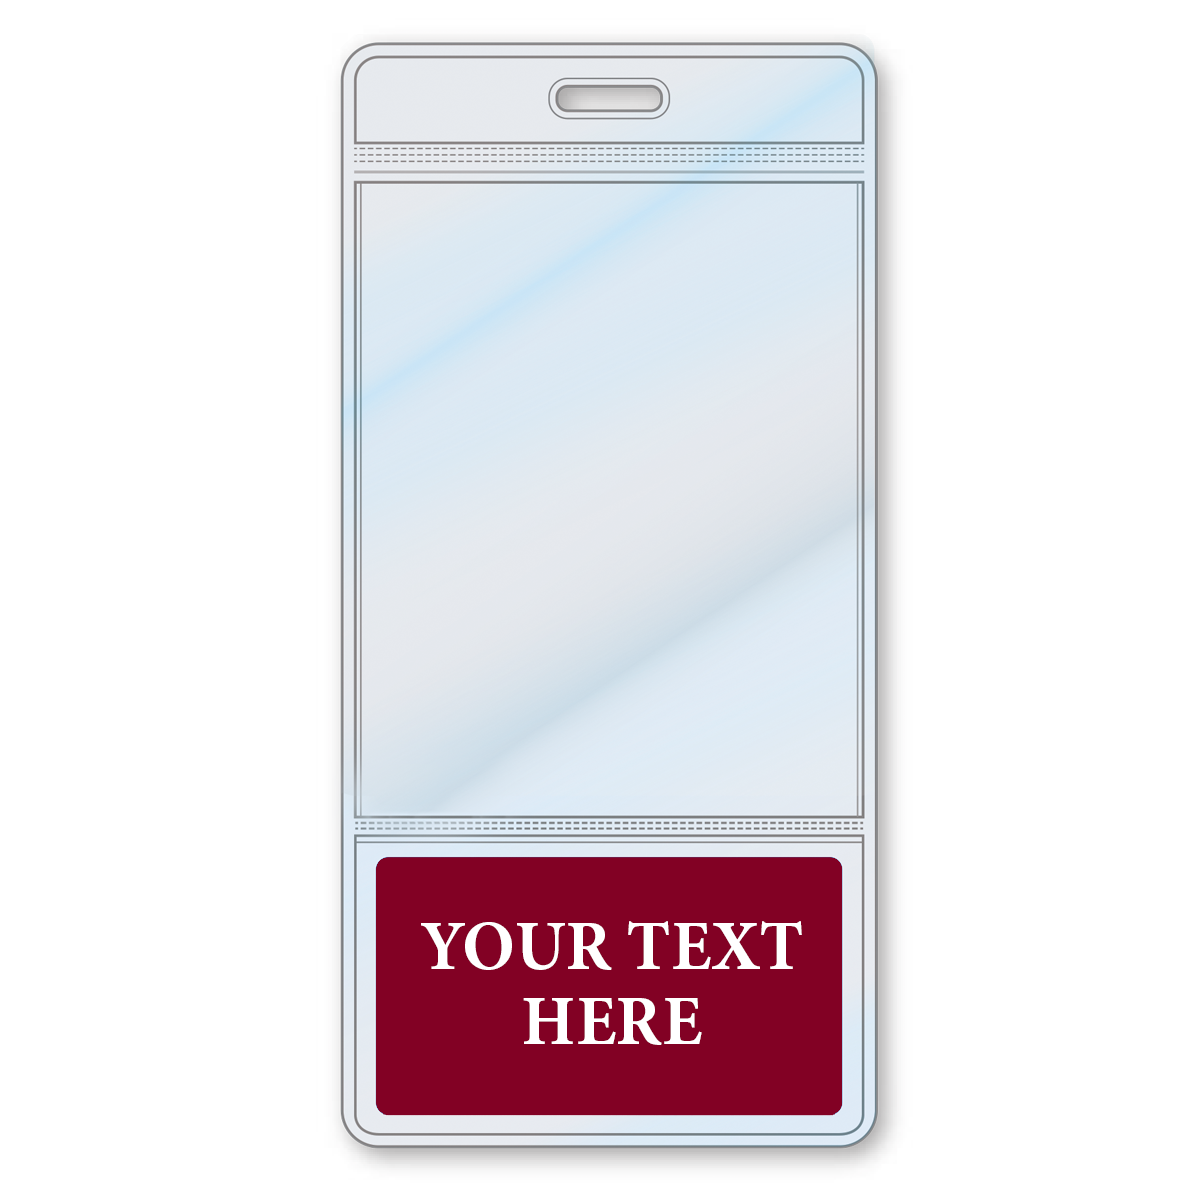 A Custom Printed BadgeBottoms® Vertical (Badge Holder & Badge Buddy IN ONE!!) with a slot for a lanyard and space for custom text in the lower maroon section labeled "YOUR TEXT HERE.